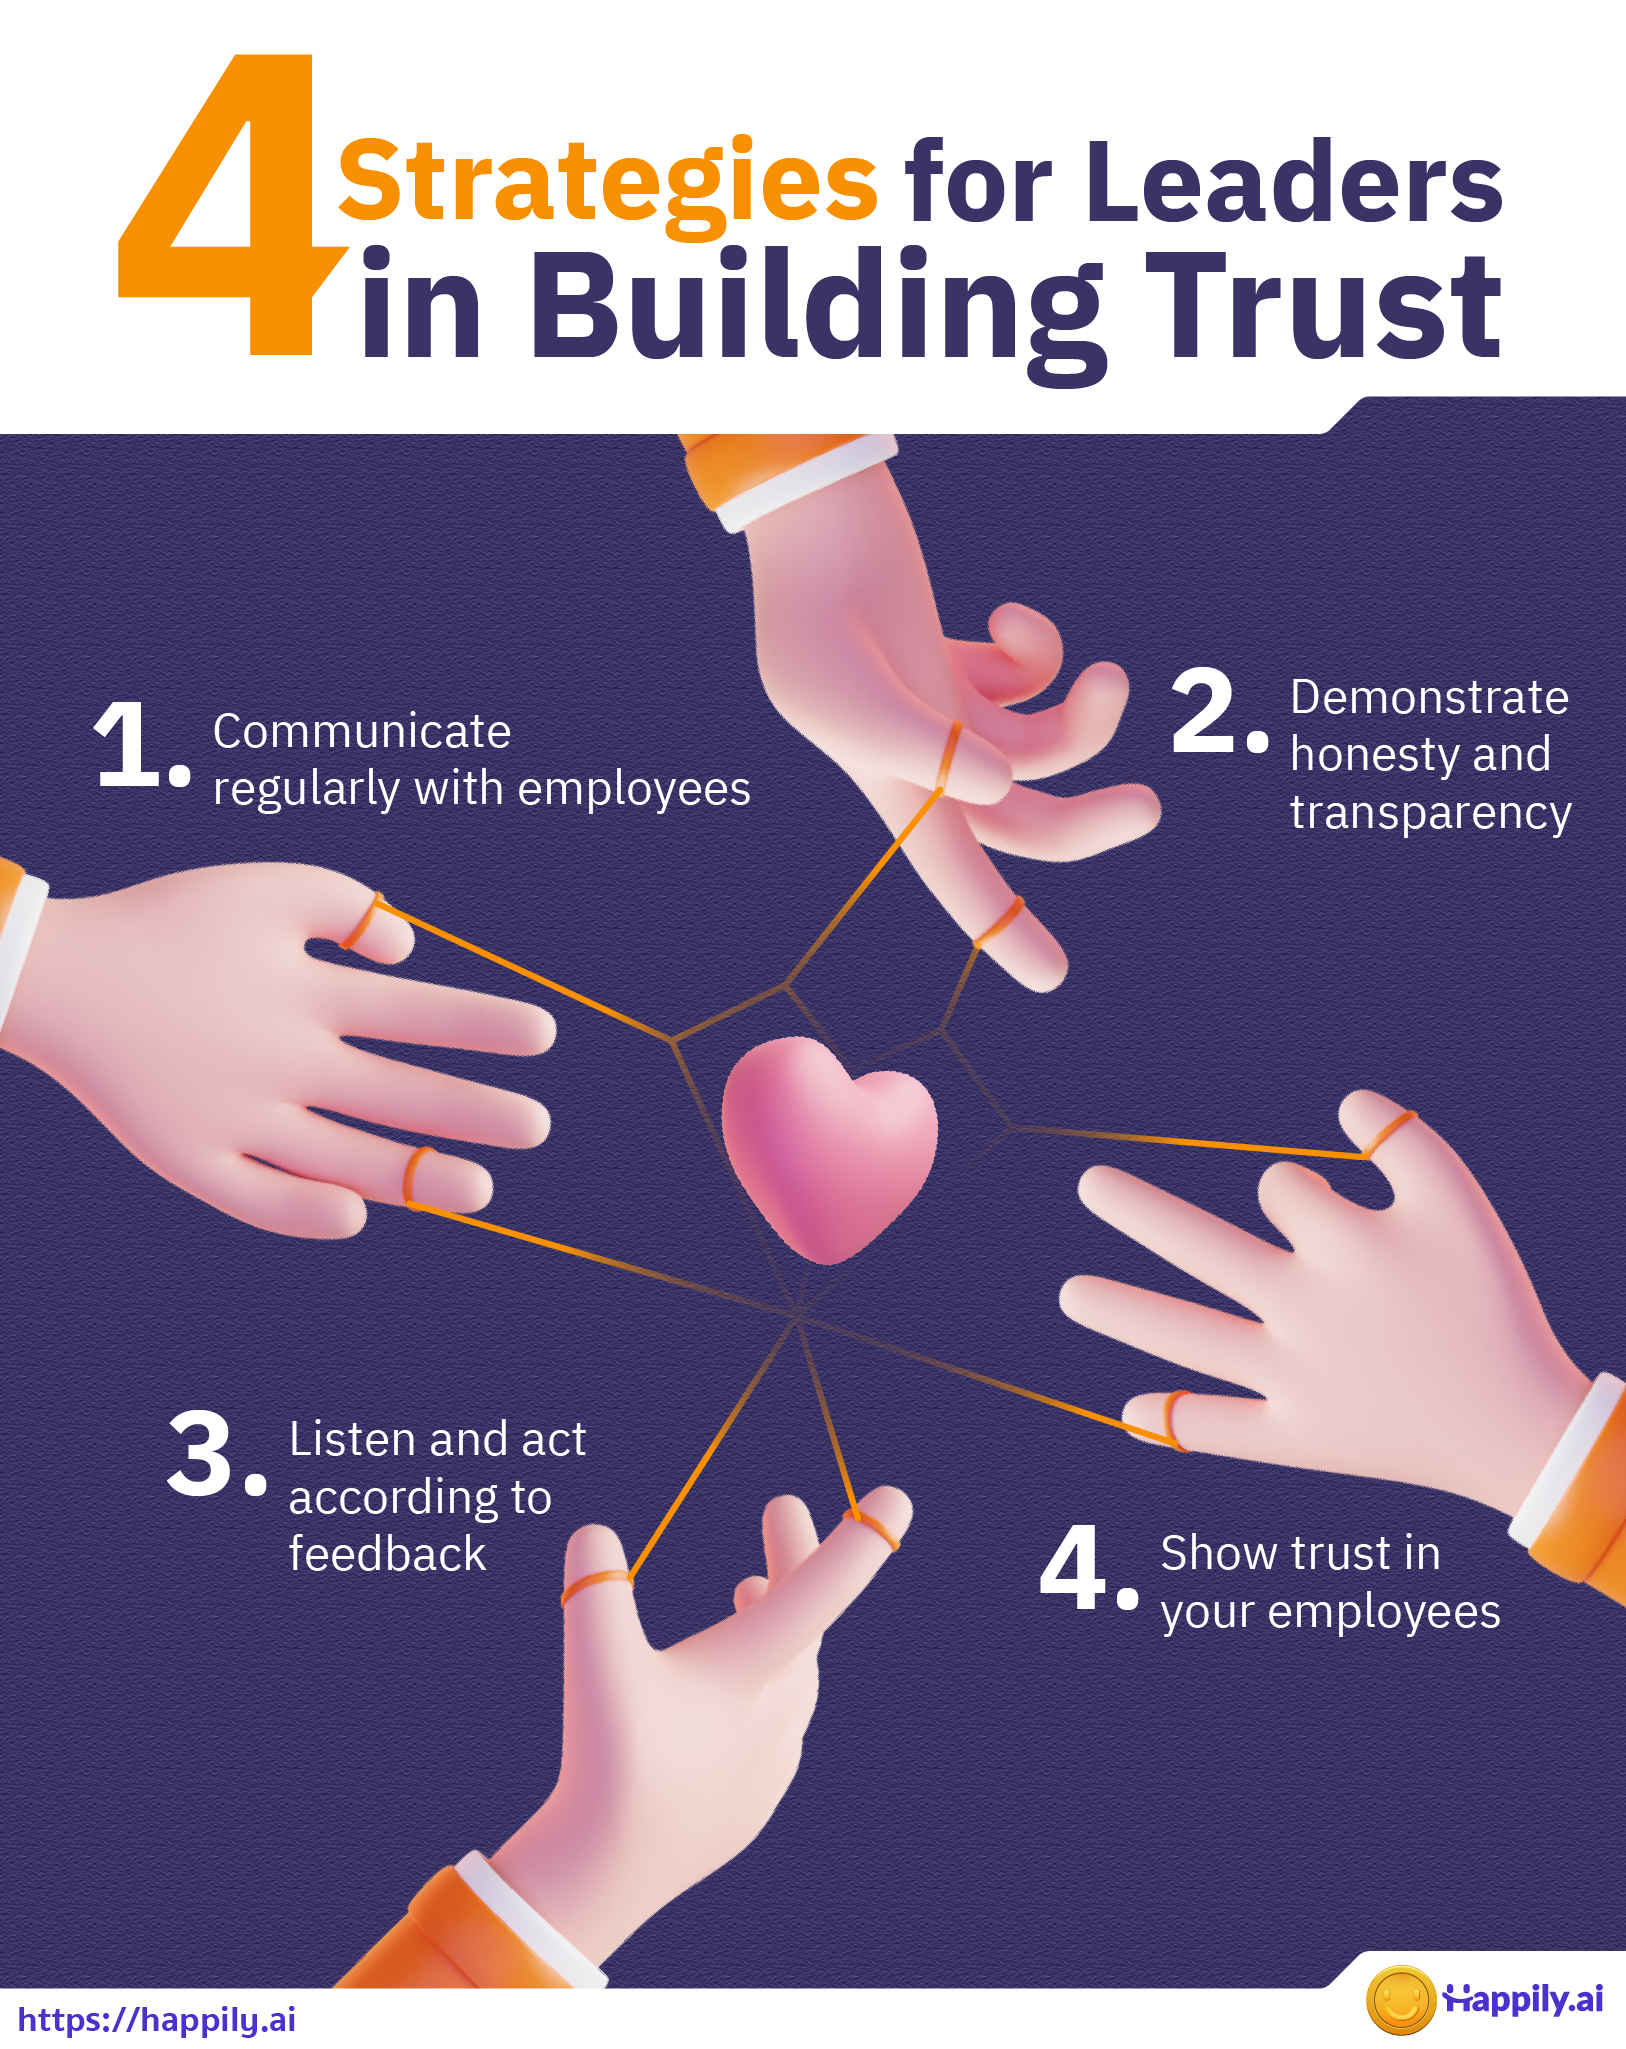 Strategies for Leaders to build trust with their employees.